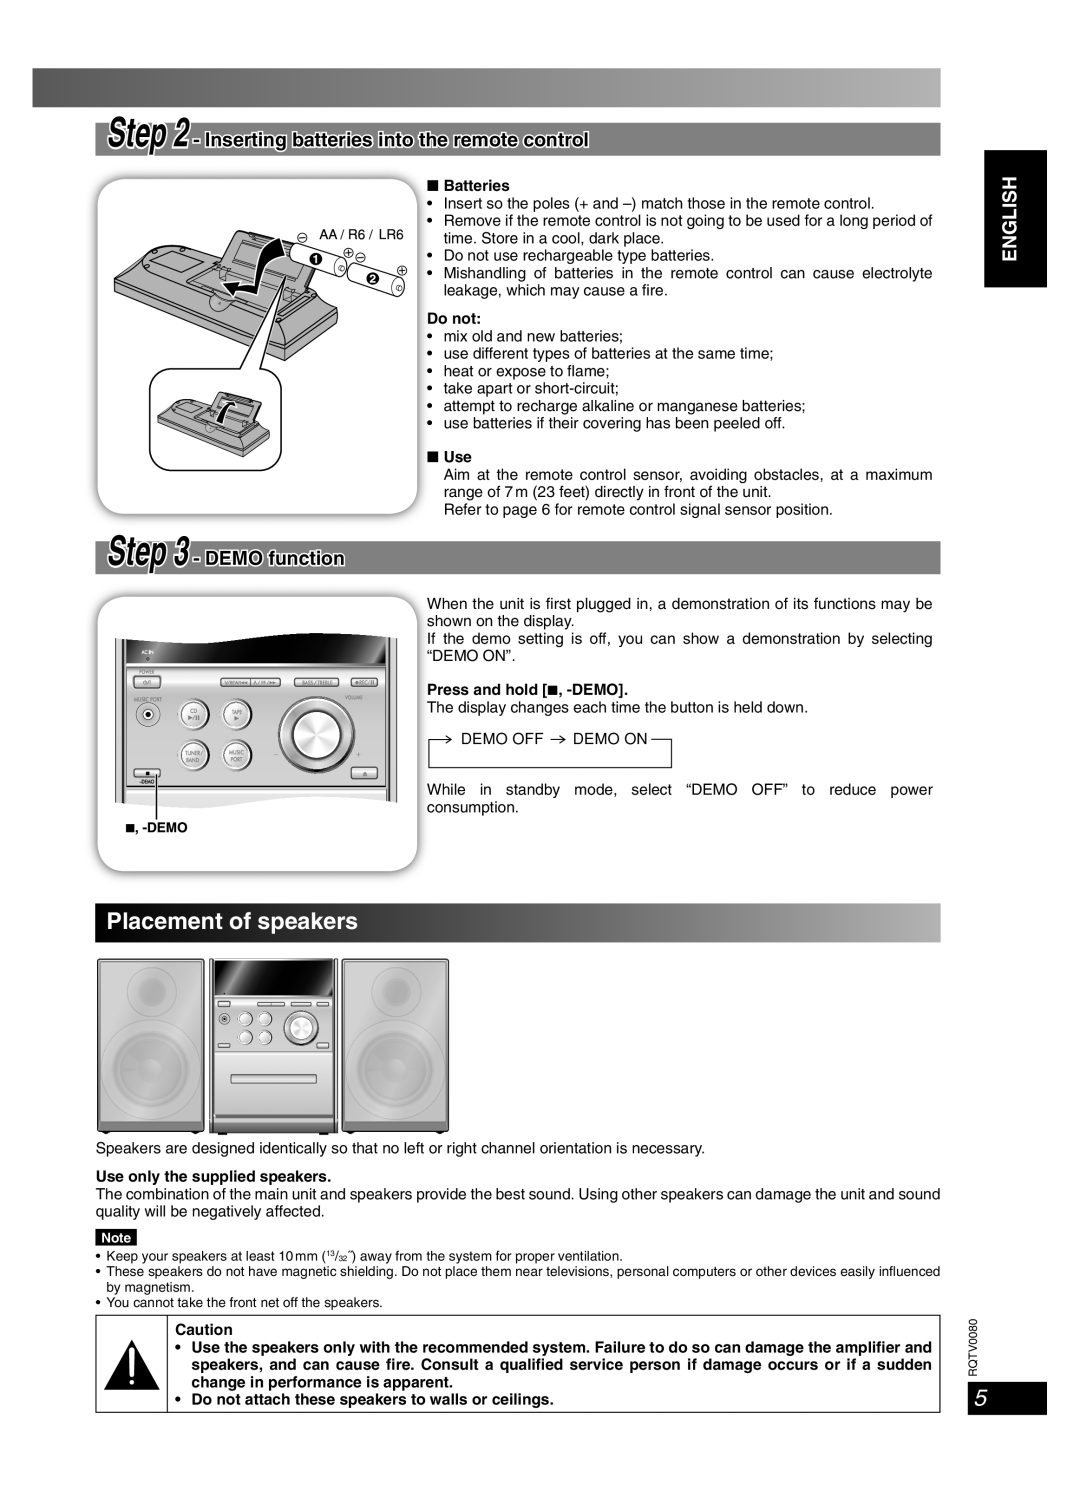 Panasonic RQTV0080-1P, SC-PM23 important safety instructions Placement of speakers, DEMO function, ENGLISH English English 